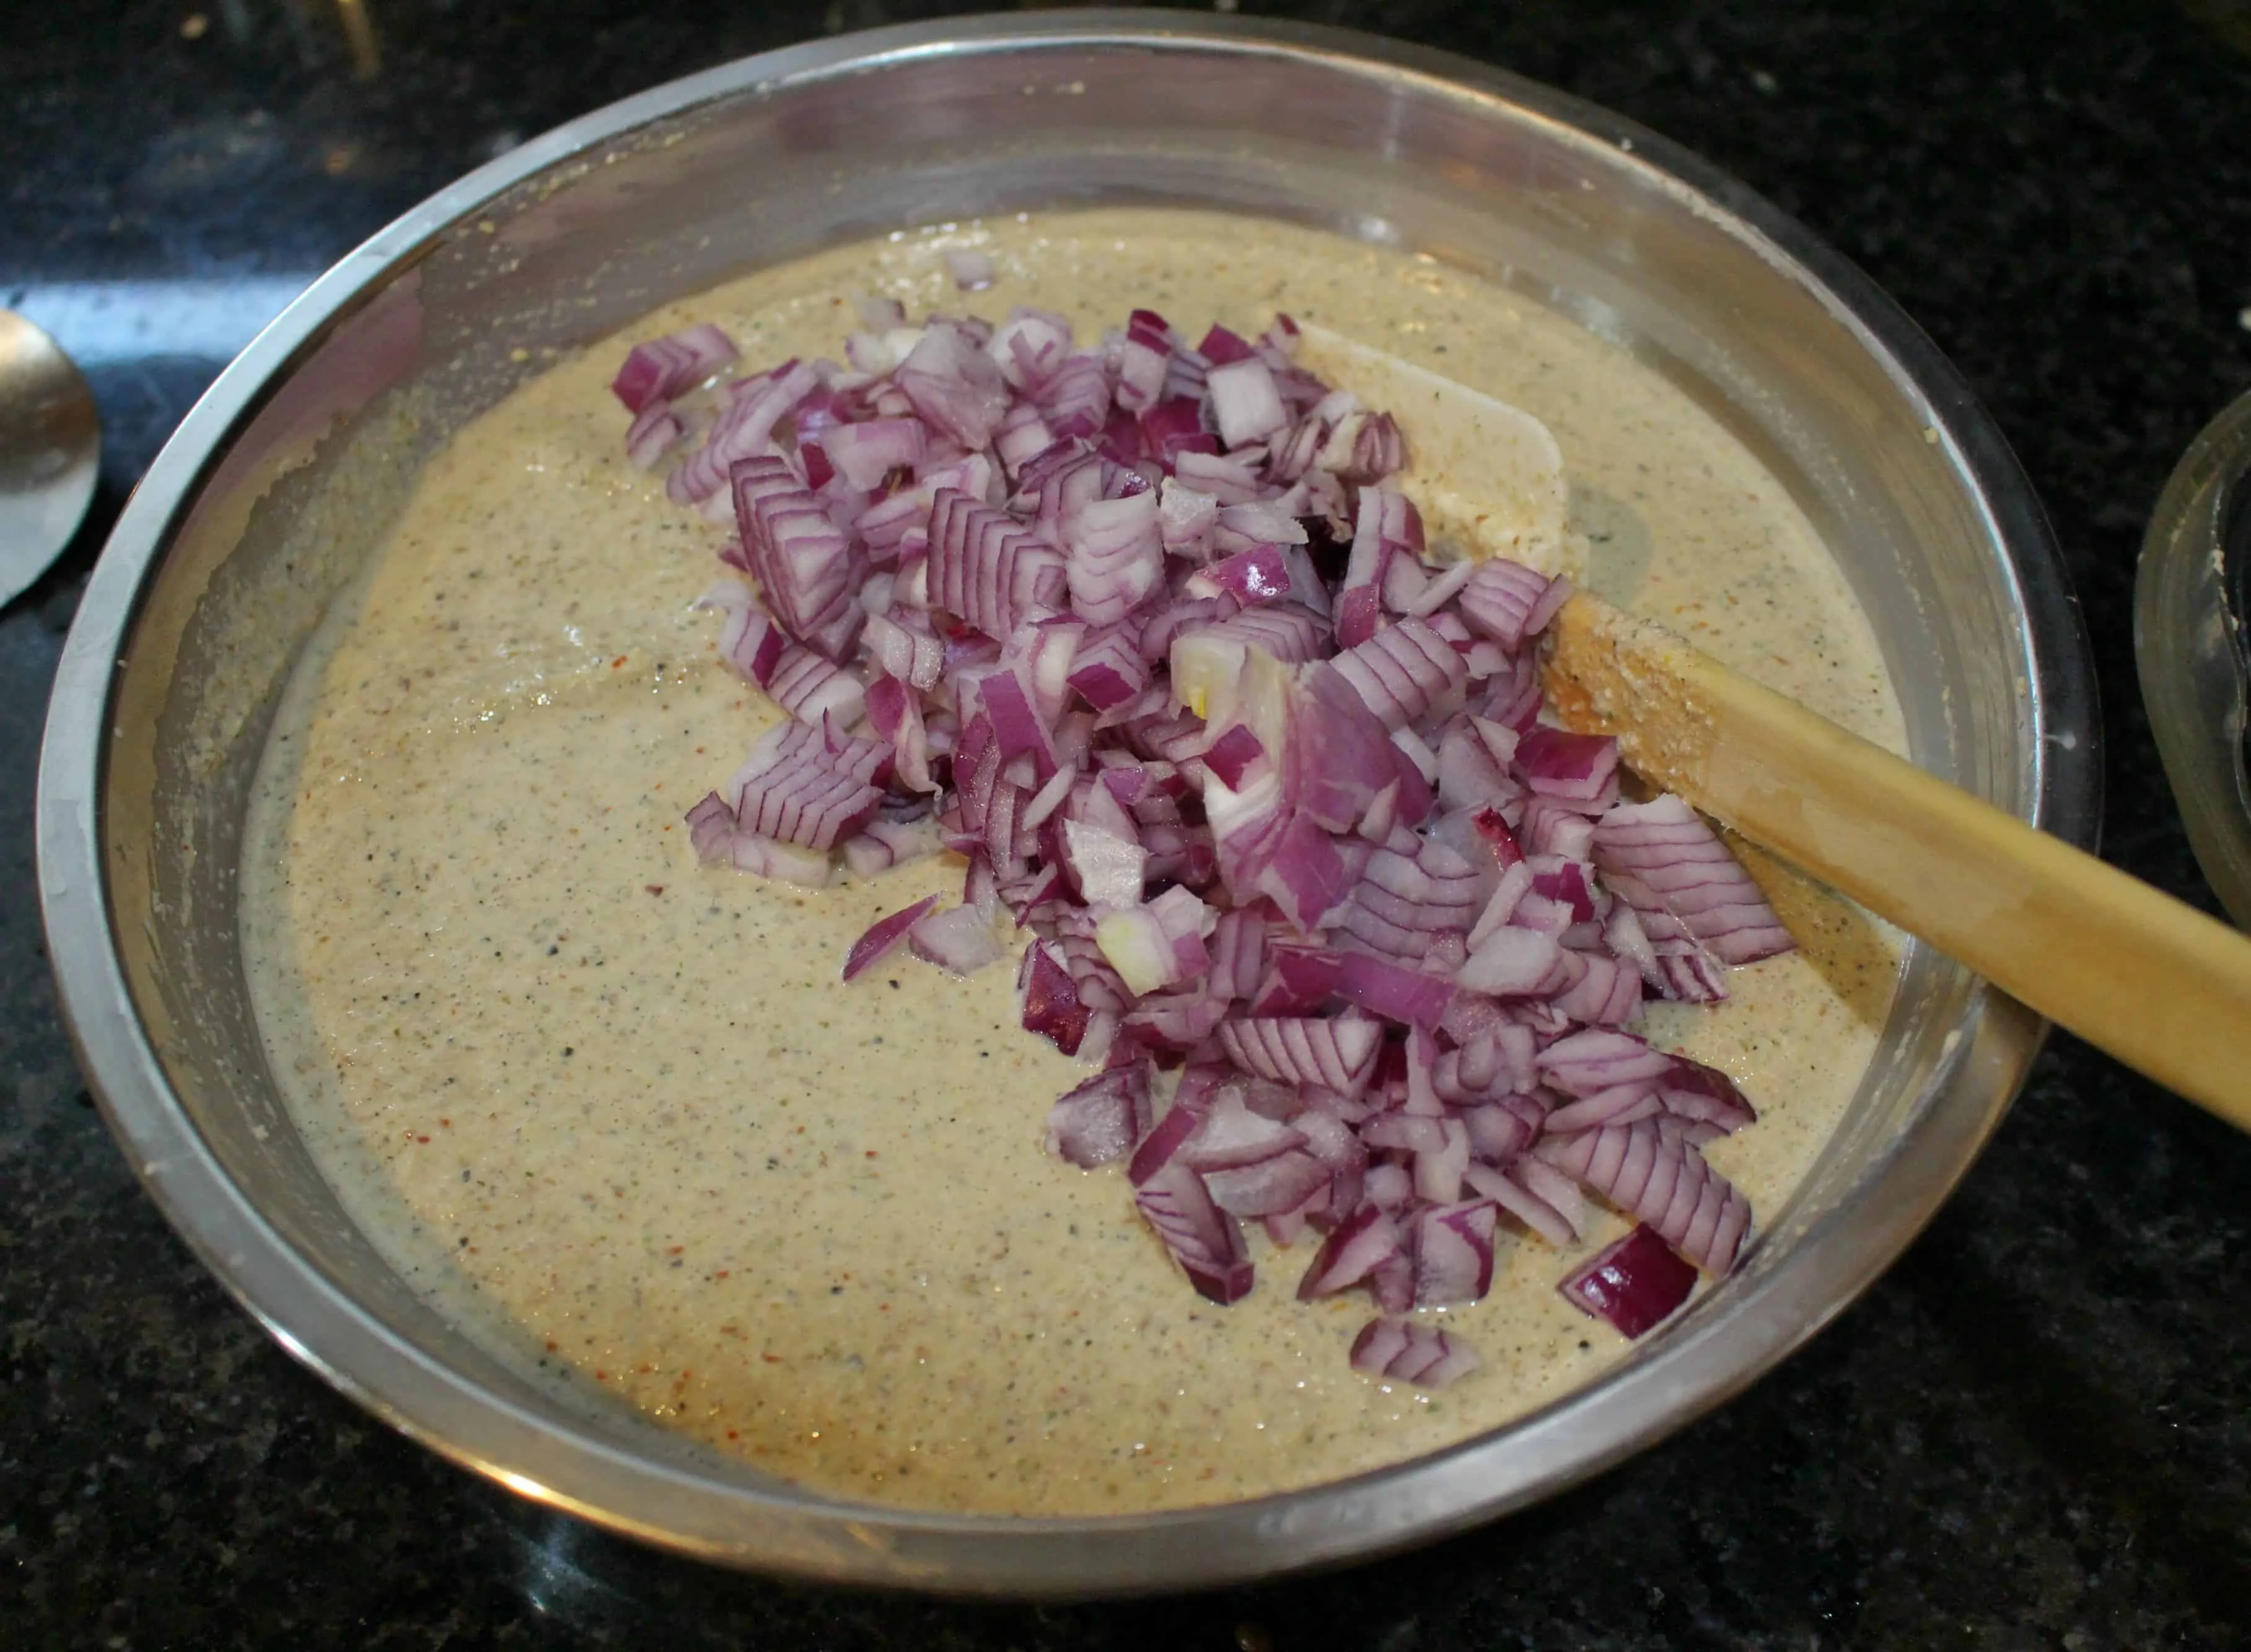 adai dosai batter with chopped red onions on top